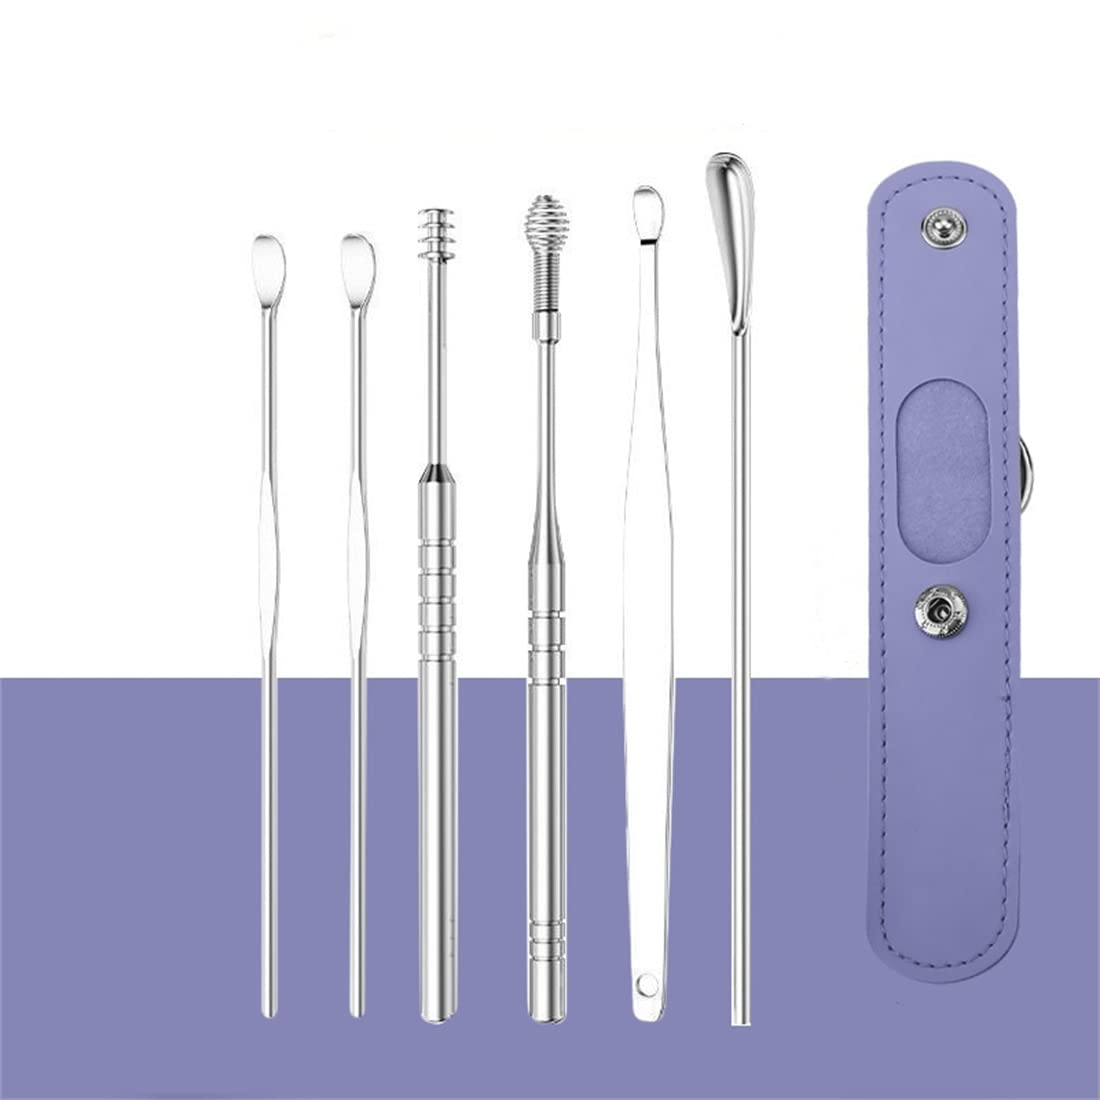 6 Pcs Ear Pick Earwax Removal Kit Innovative Spring Earwax Cleaner